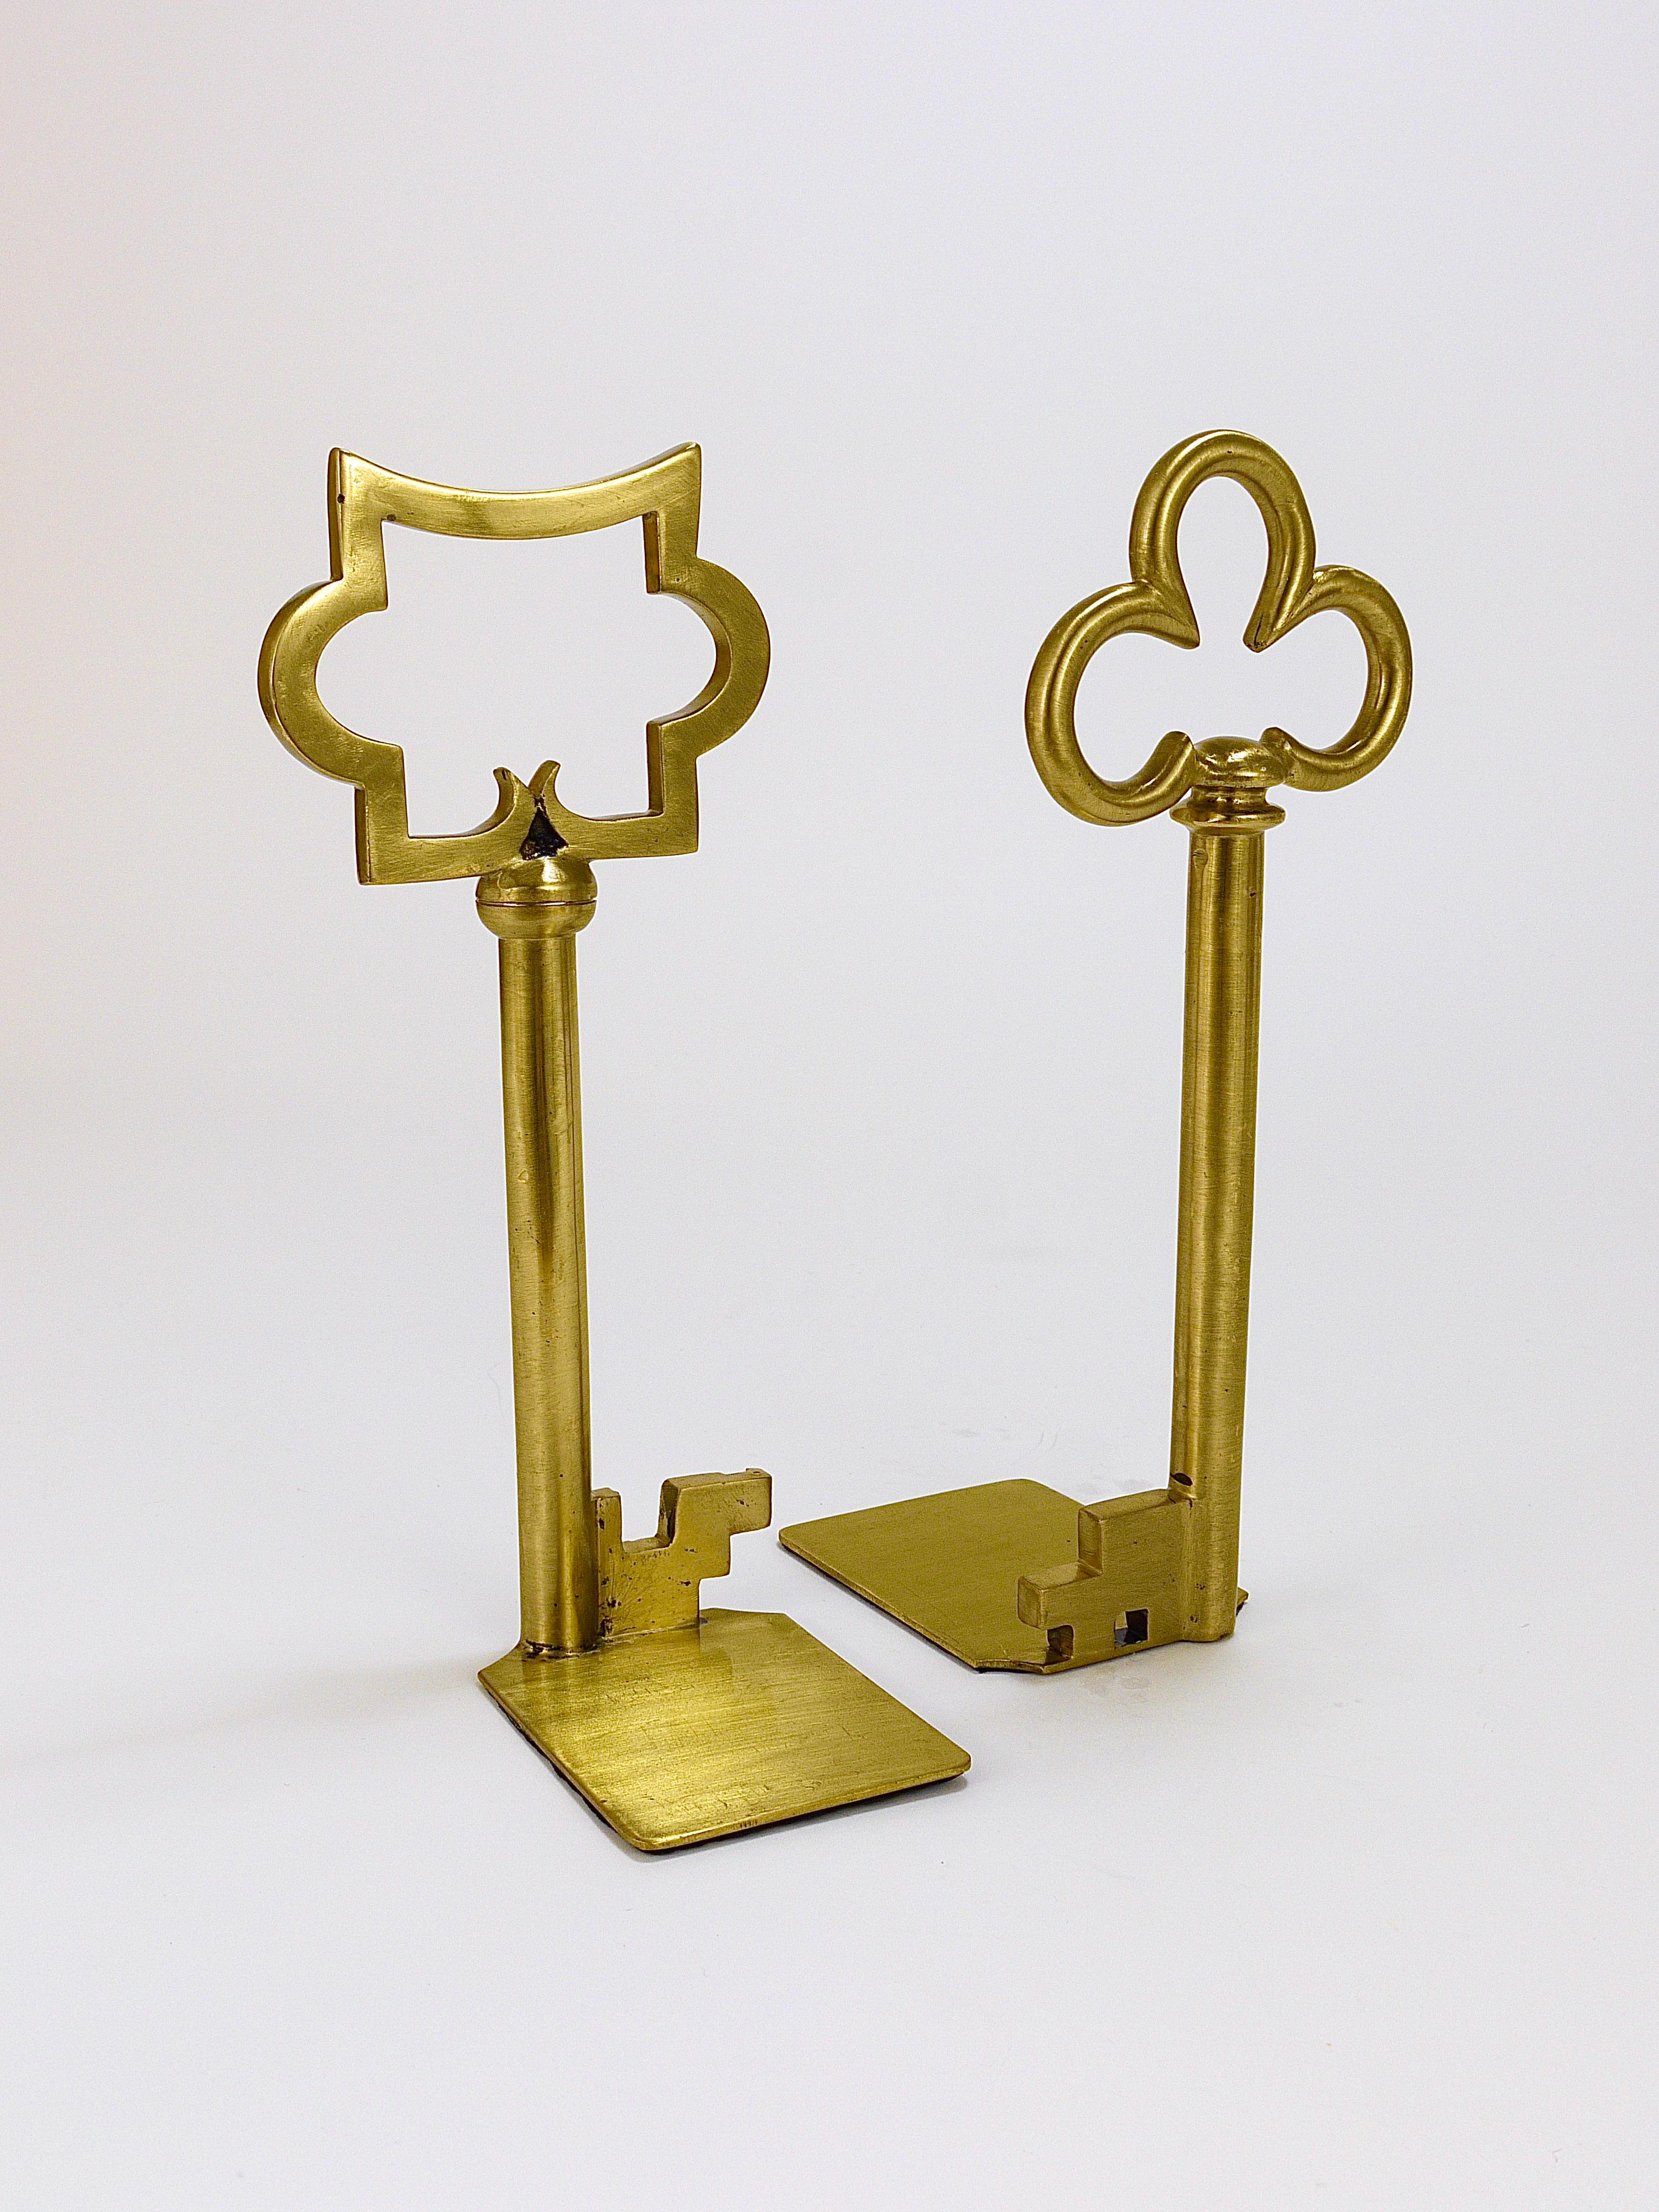 Sculptural Austrian Midcentury Brass Key Book Ends from the, 1950s For Sale 1